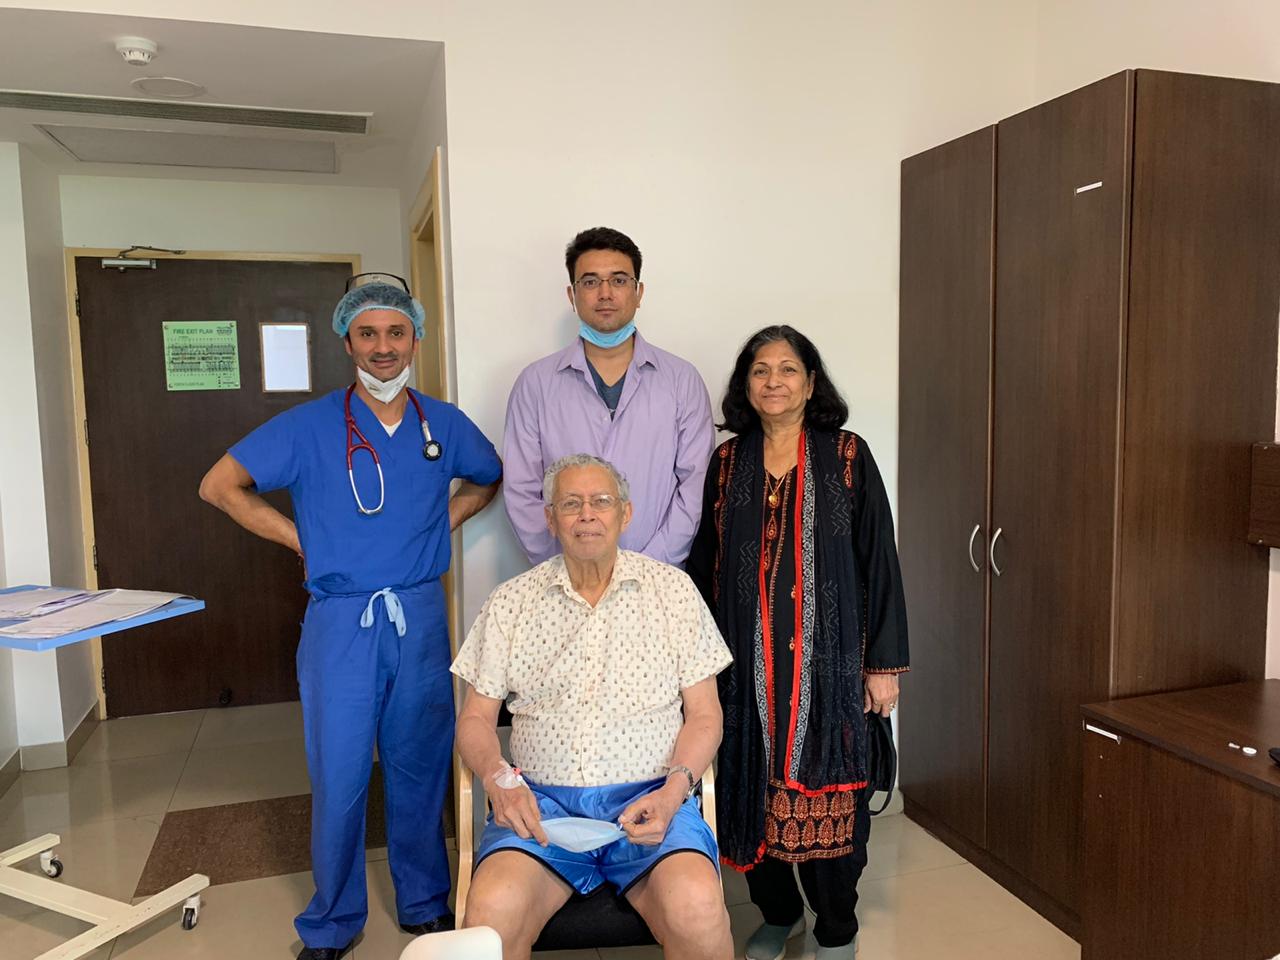 Paras Hospitals, Gurugram places world’s smallest pacemaker in 83-year-old patient with no prior or post surgery visit to avoid COVID-19 infection